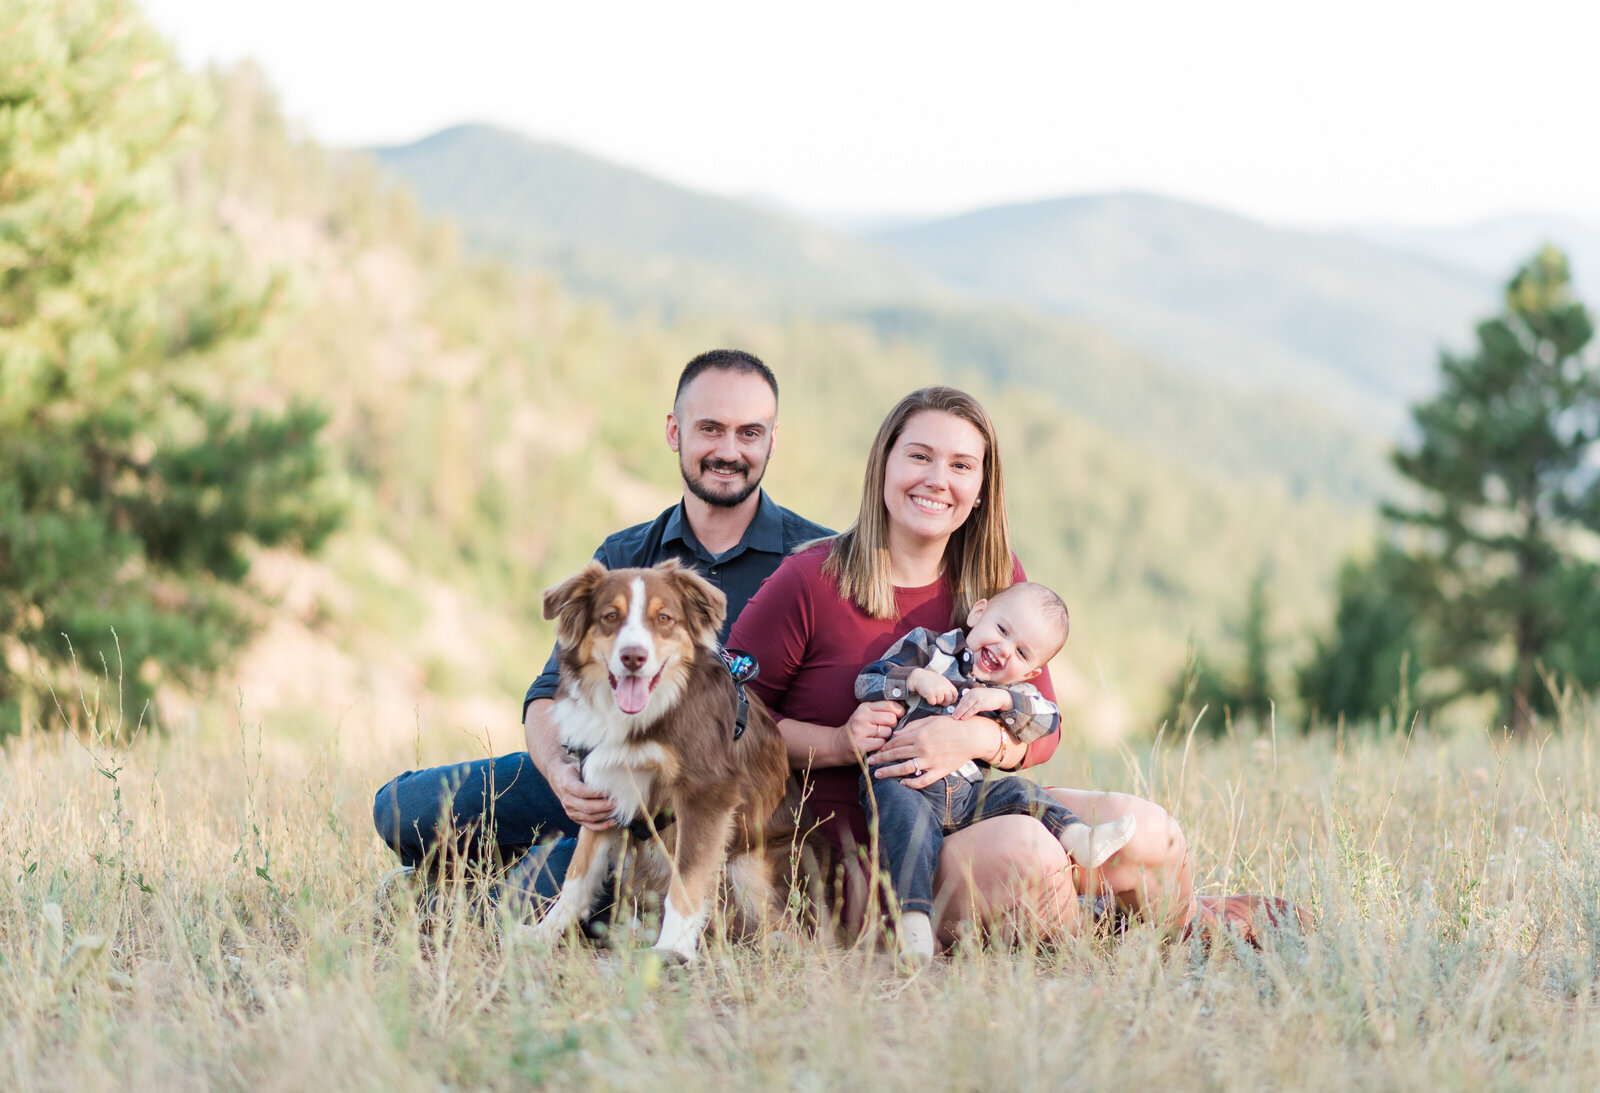 denver family photographers captures young family with a baby and a dog sitting in a field together with the mountains in the distance